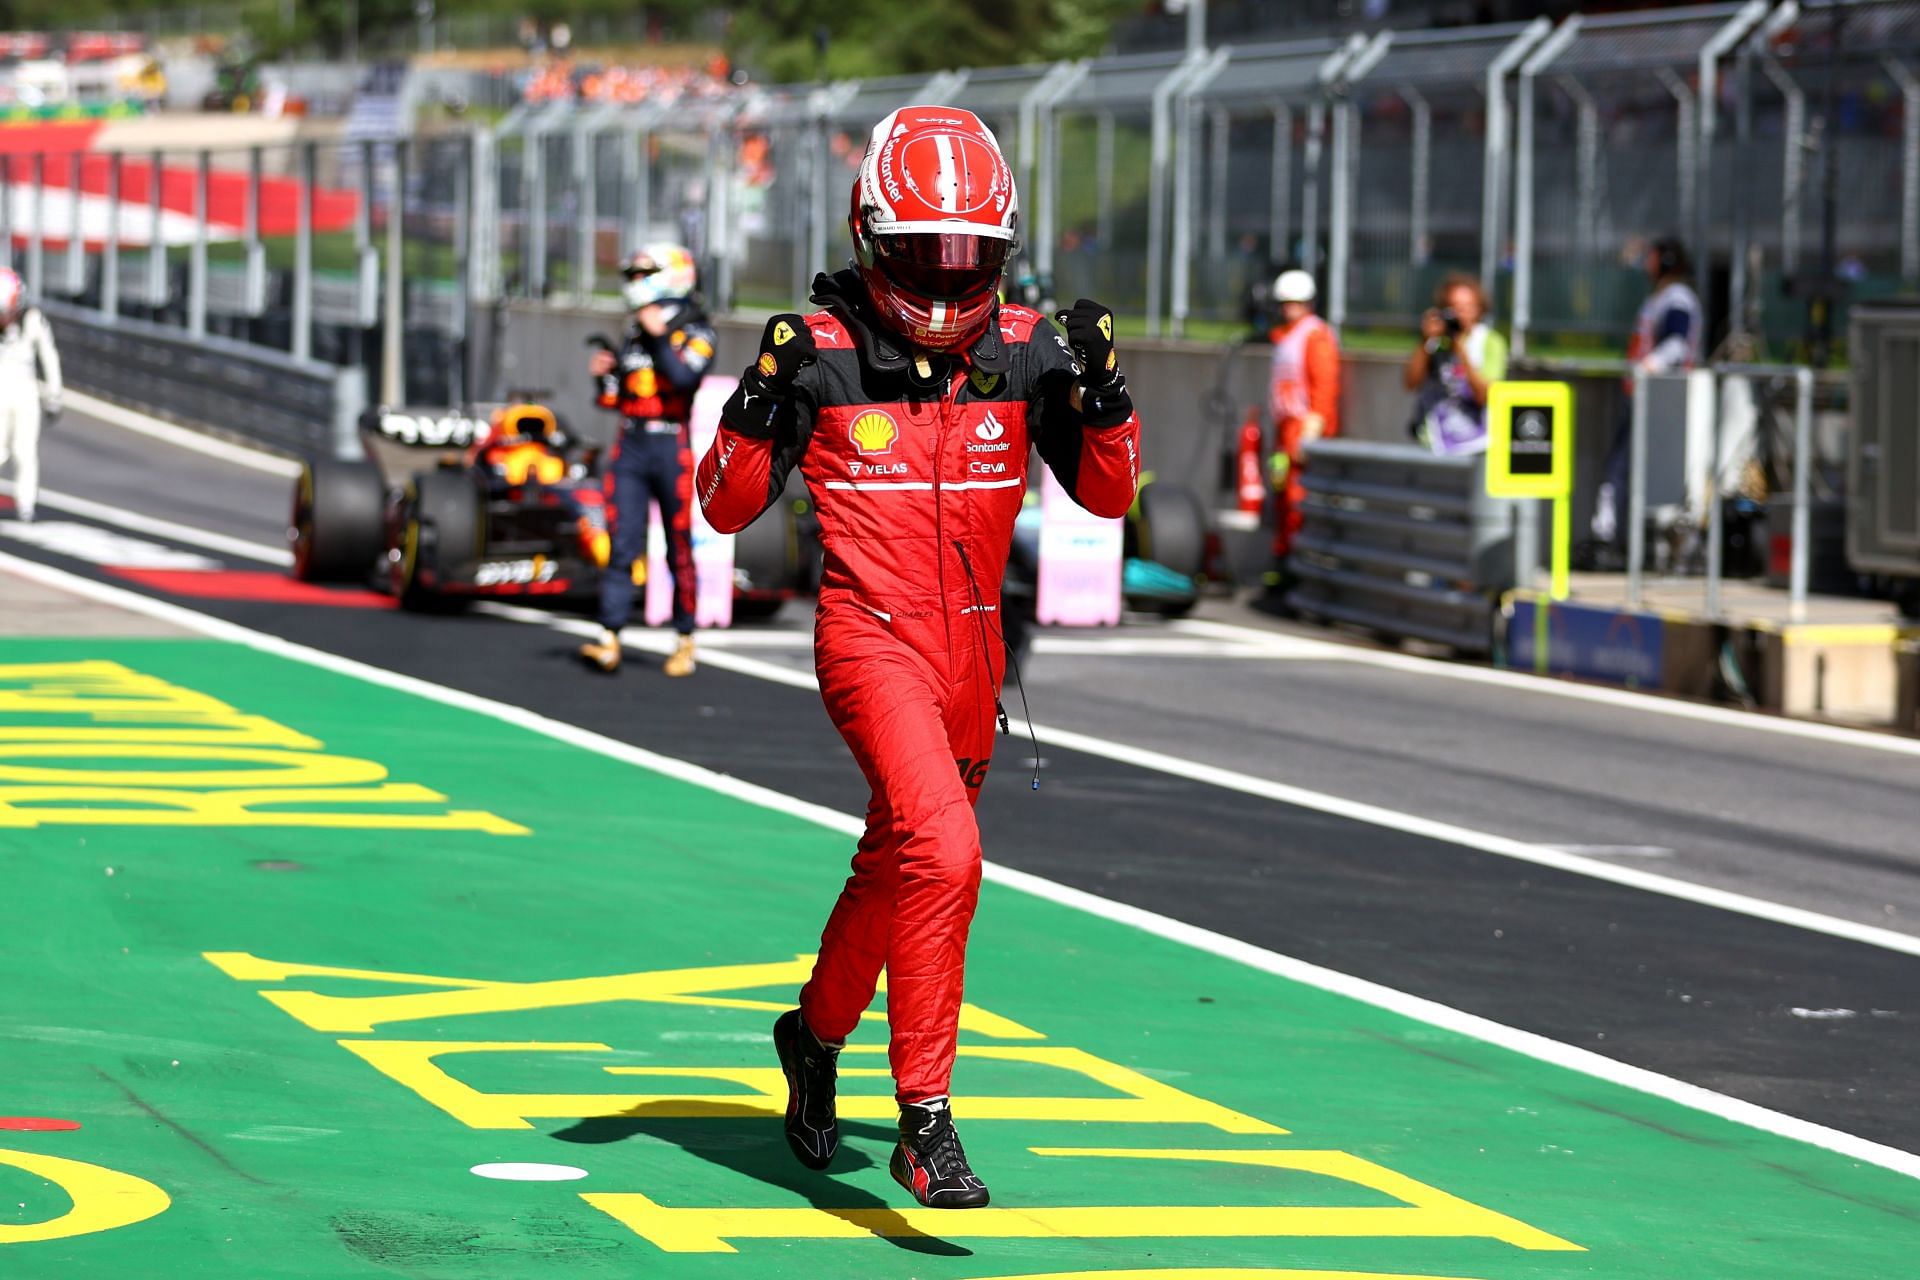 2022 F1 Grand Prix of Austria - Charles Leclerc wins at the Red Bull Ring